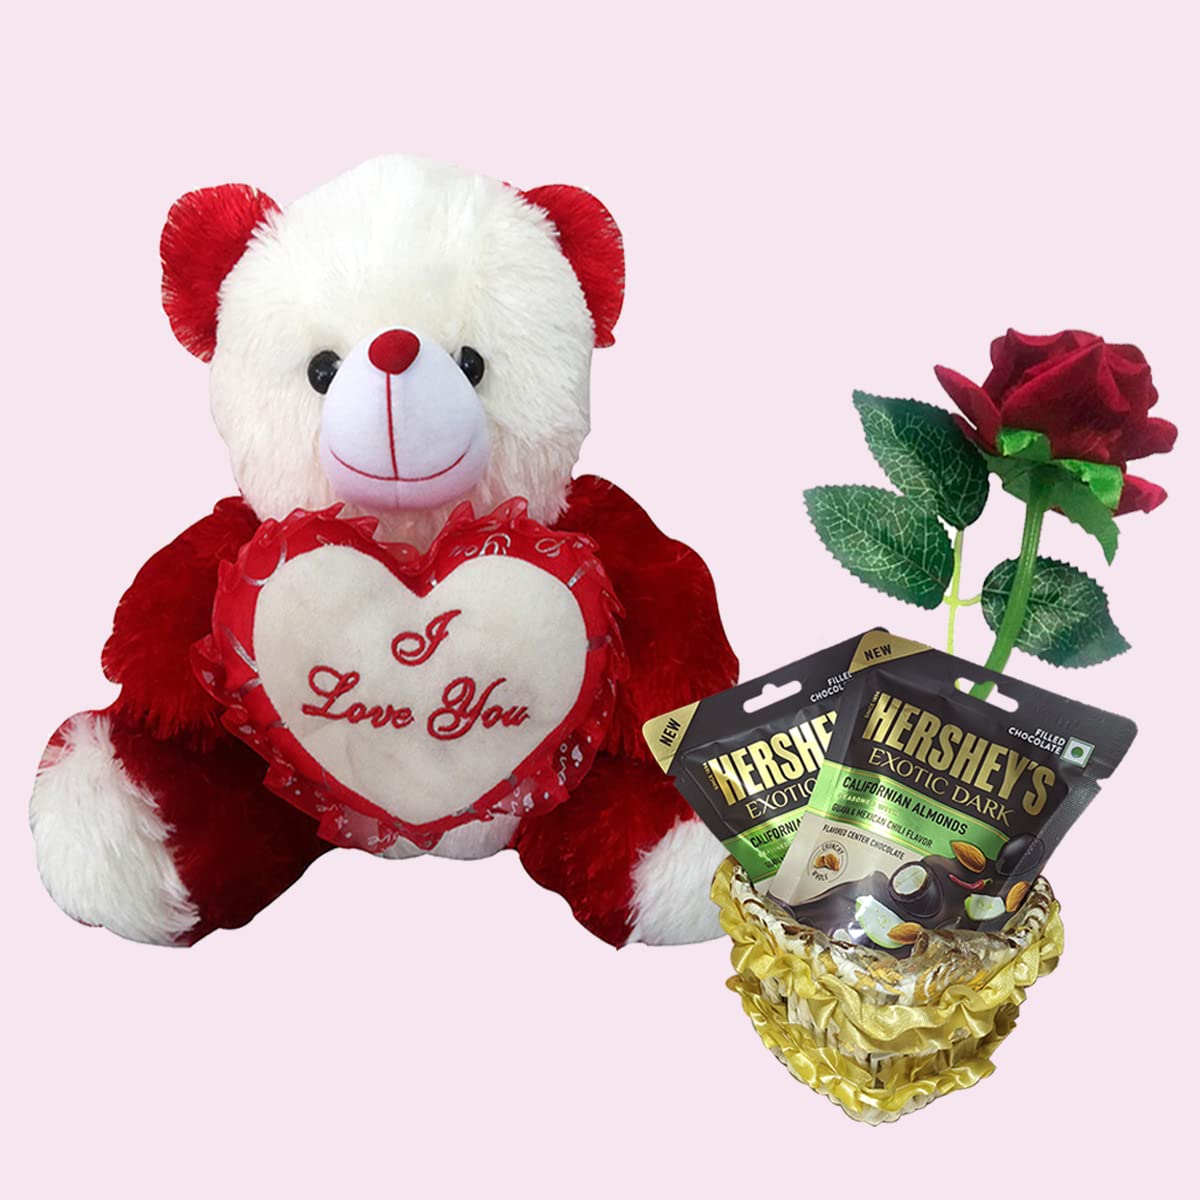 Love Gifts | Chocolate Gifts | Teddy Gifts | Surprise Gifts | Get ...